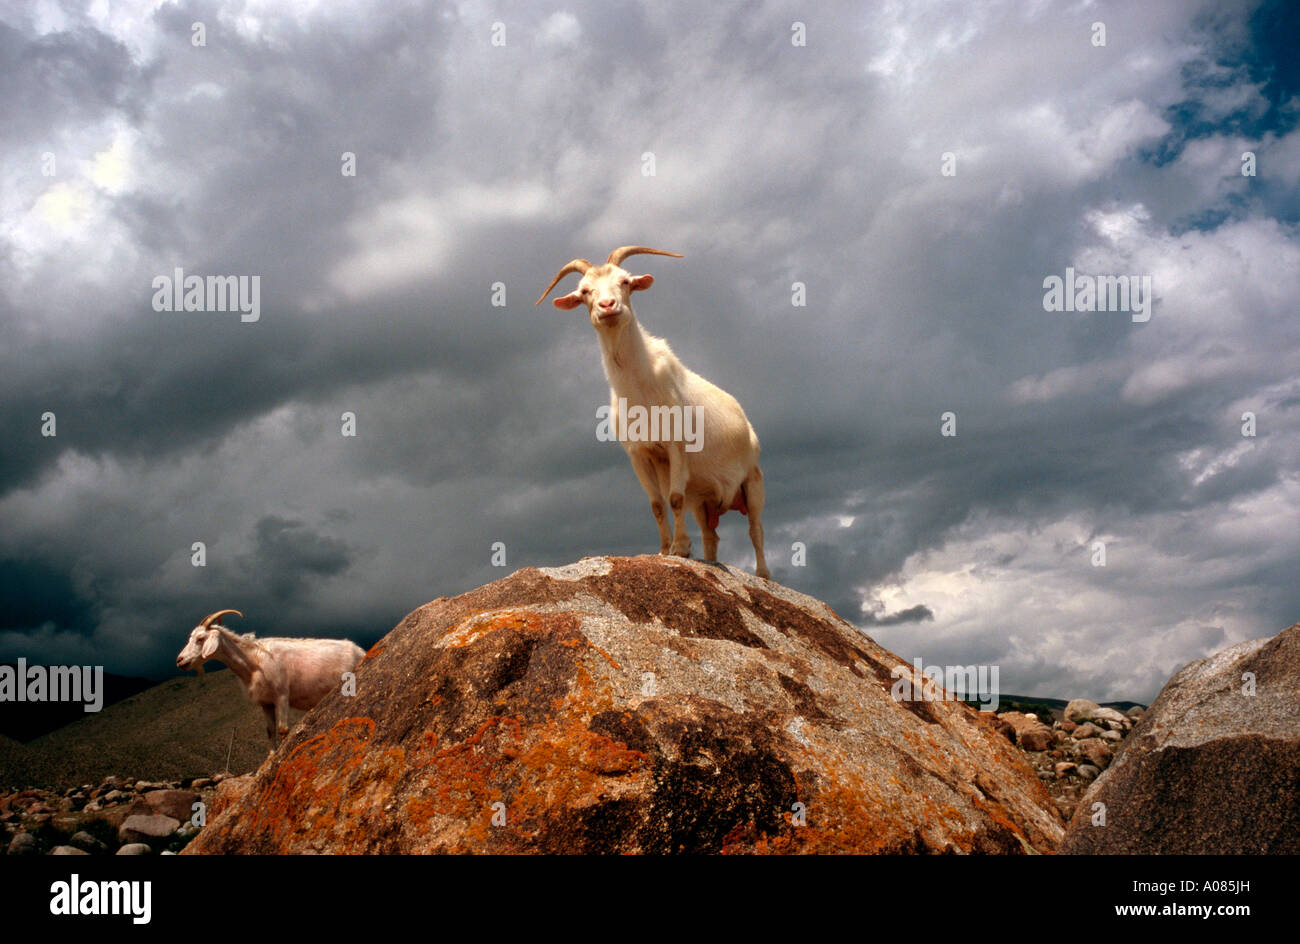 June 14, 2006 - Goats at lake Issyk-Kul in Kyrgyzstan Stock Photo